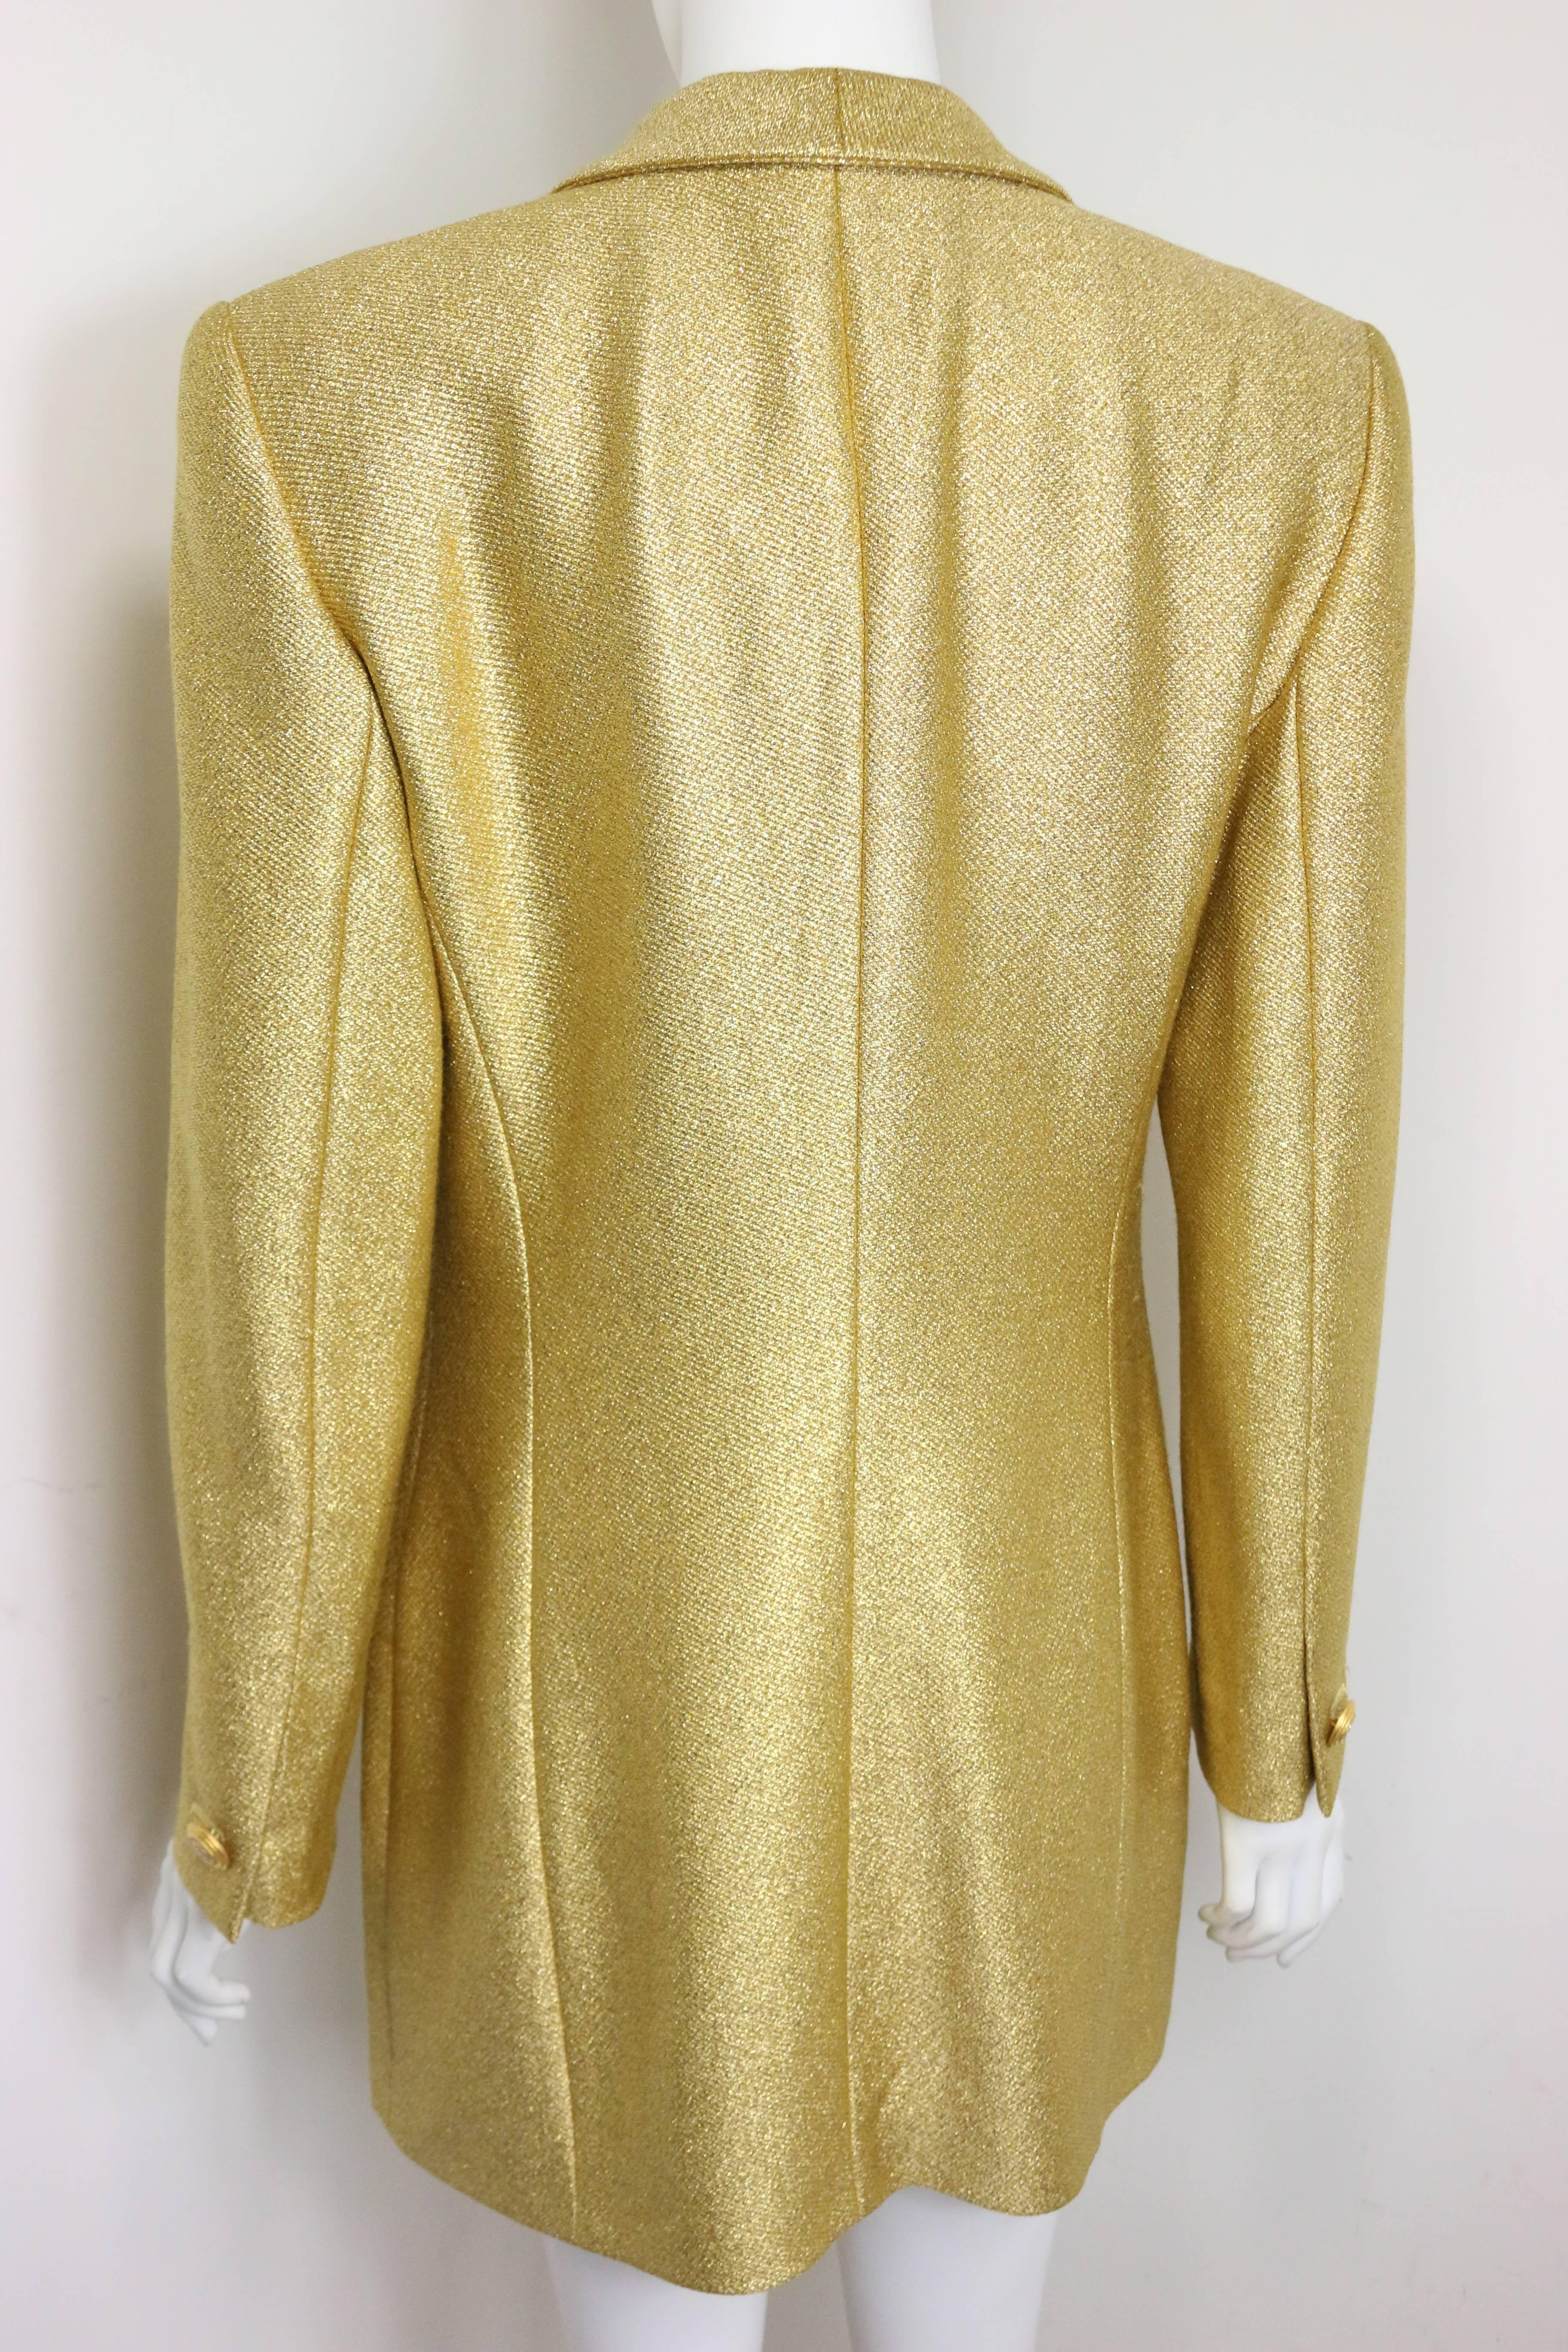 Escada Couture Gold Toned Metallic Shinny Shawl Blazer  In Excellent Condition For Sale In Sheung Wan, HK